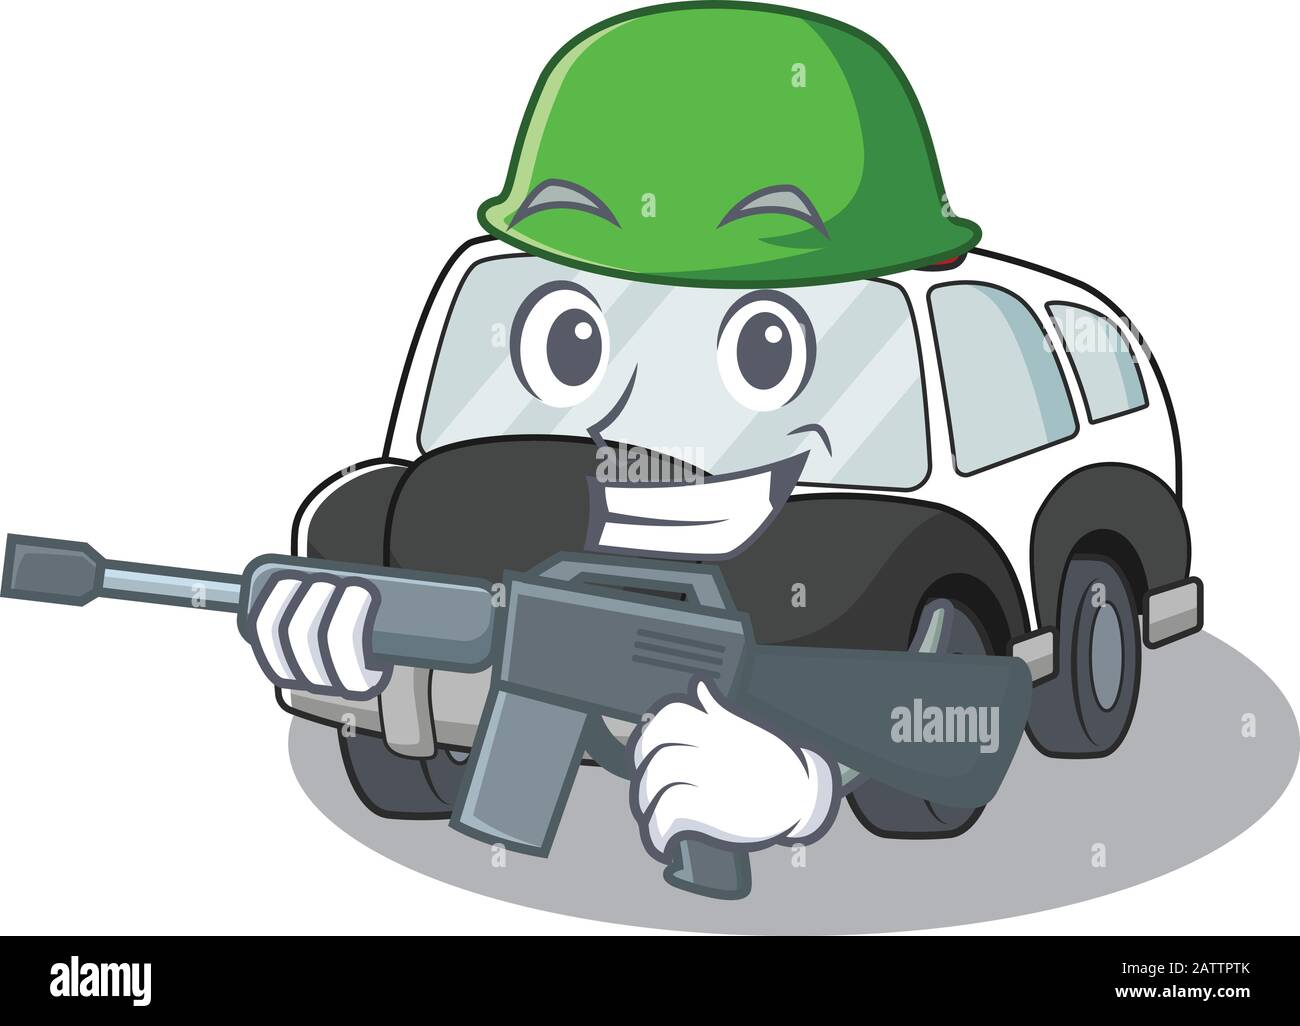 A cute picture of police car Army with machine gun Stock Vector